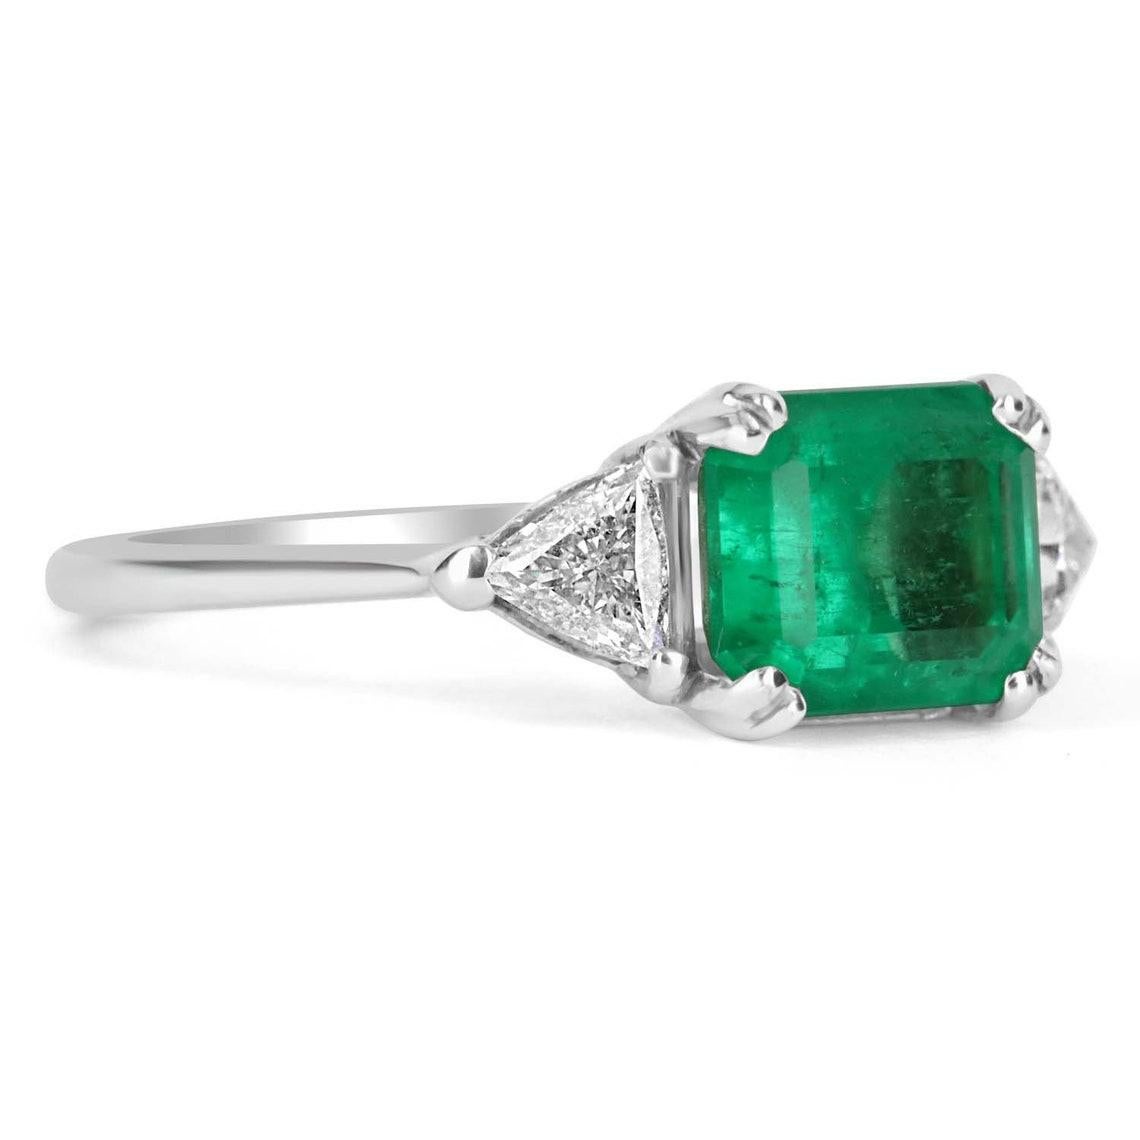 Featured is a Colombian emerald and diamond three stone engagement or right-hand ring. An extraordinary custom-created ring made by JR Colombian Emeralds. Dexterously crafted in gleaming 18K gold, this ring displays a 2.21-carat natural Colombian